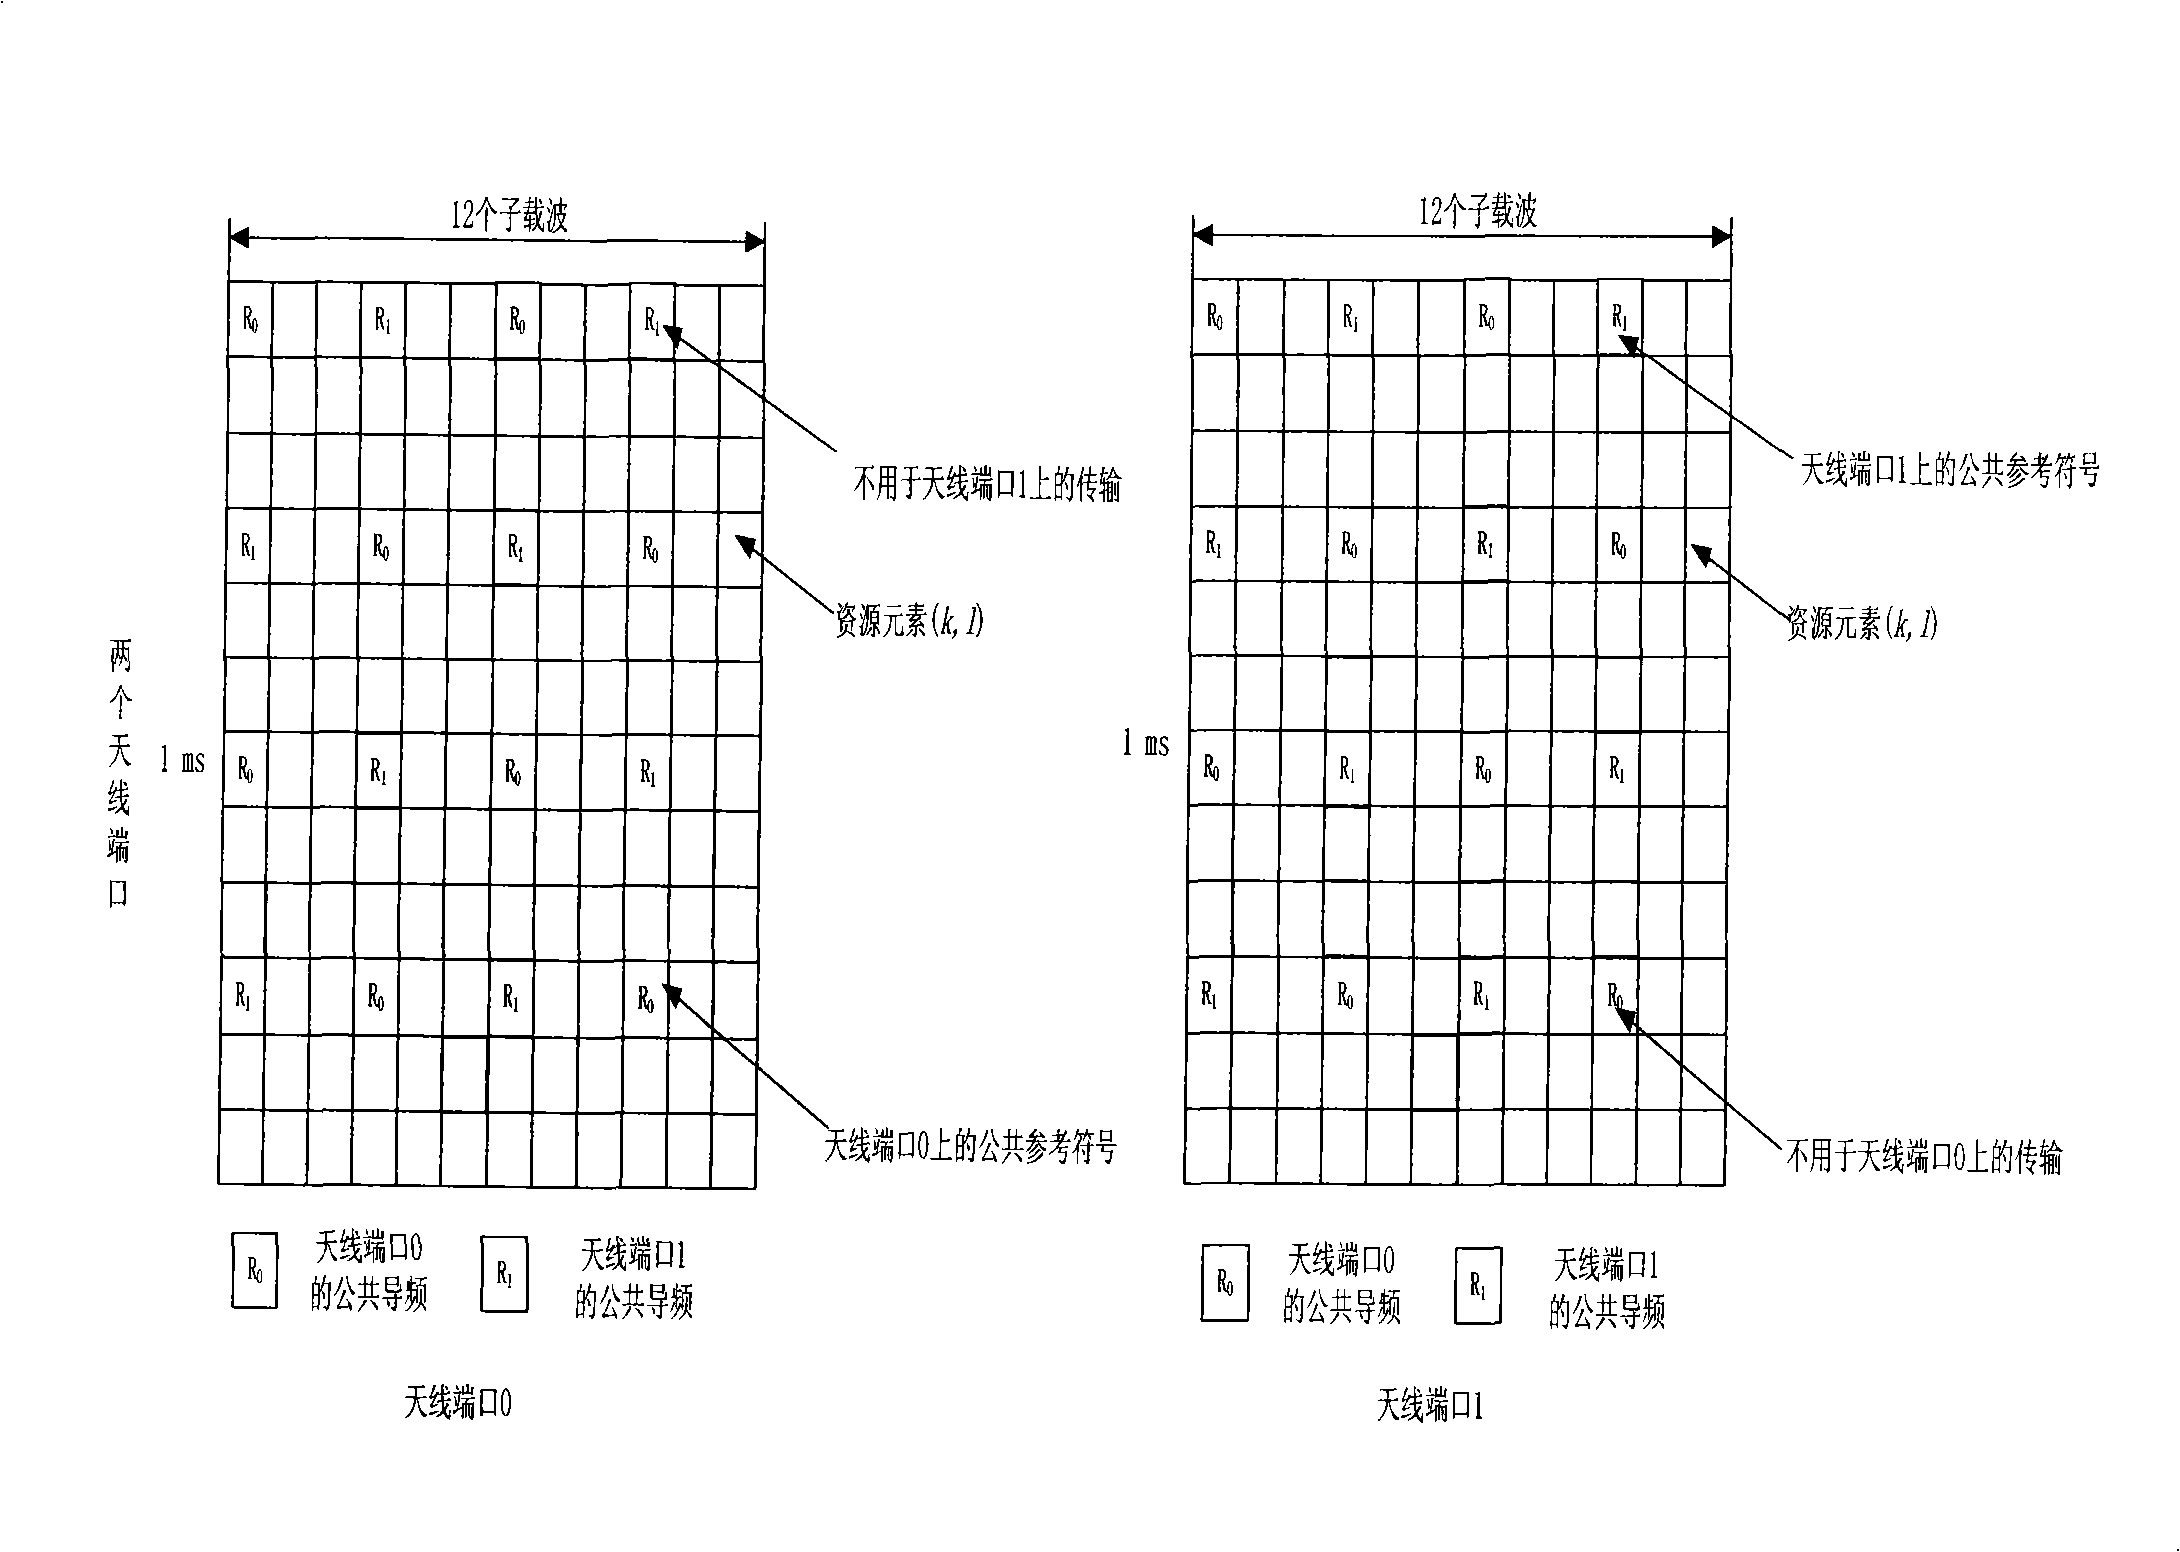 Method for mapping down special pilot frequency and physical resource block of long loop prefix frame structure